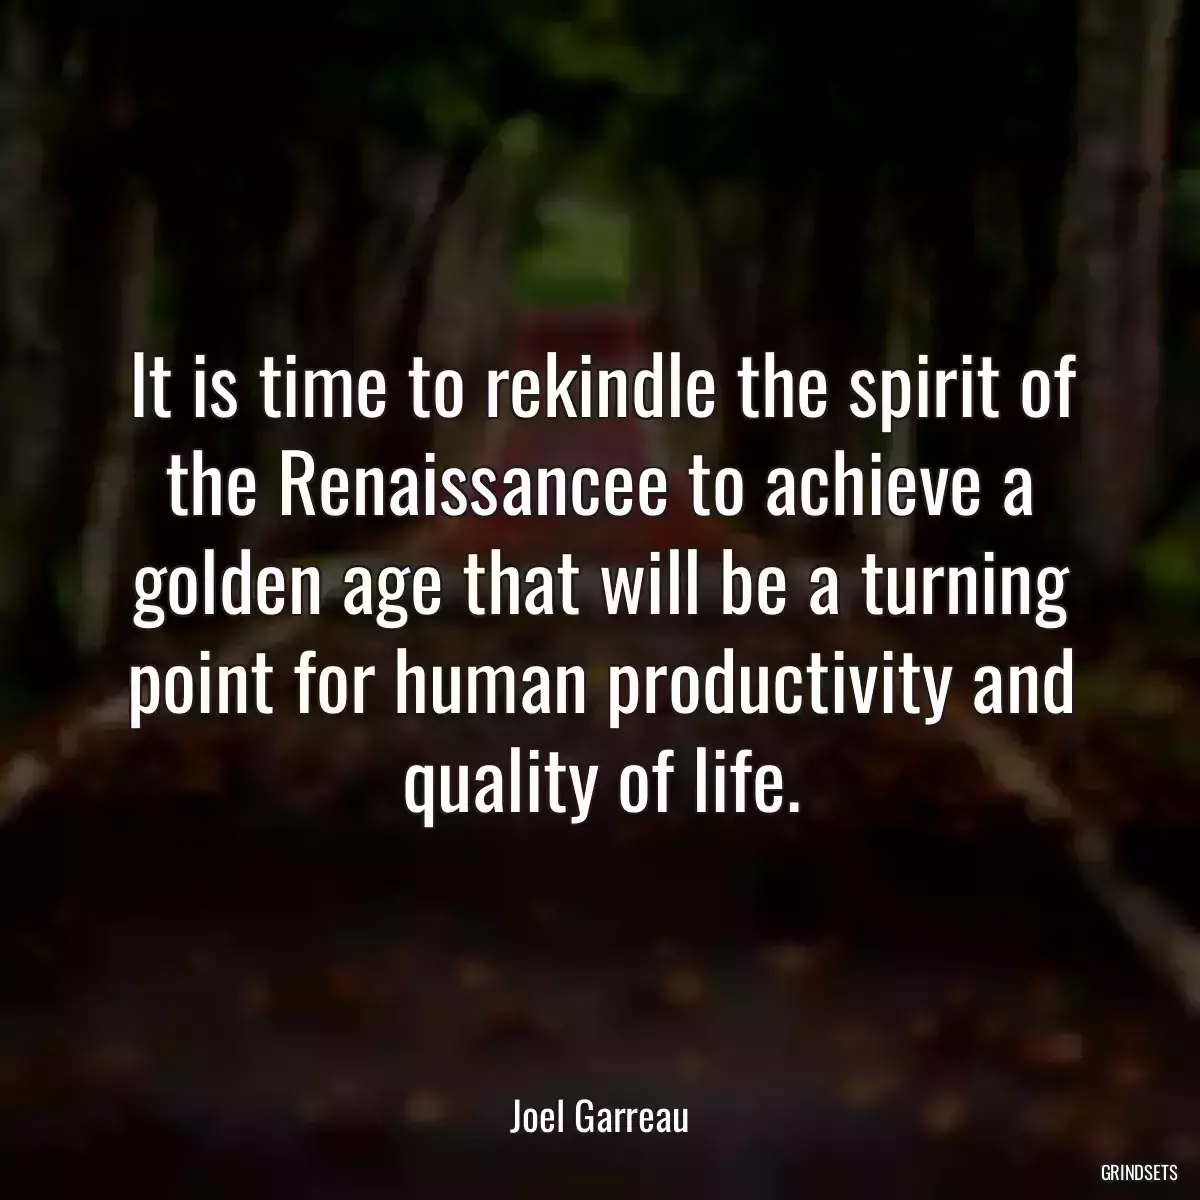 It is time to rekindle the spirit of the Renaissancee to achieve a golden age that will be a turning point for human productivity and quality of life.